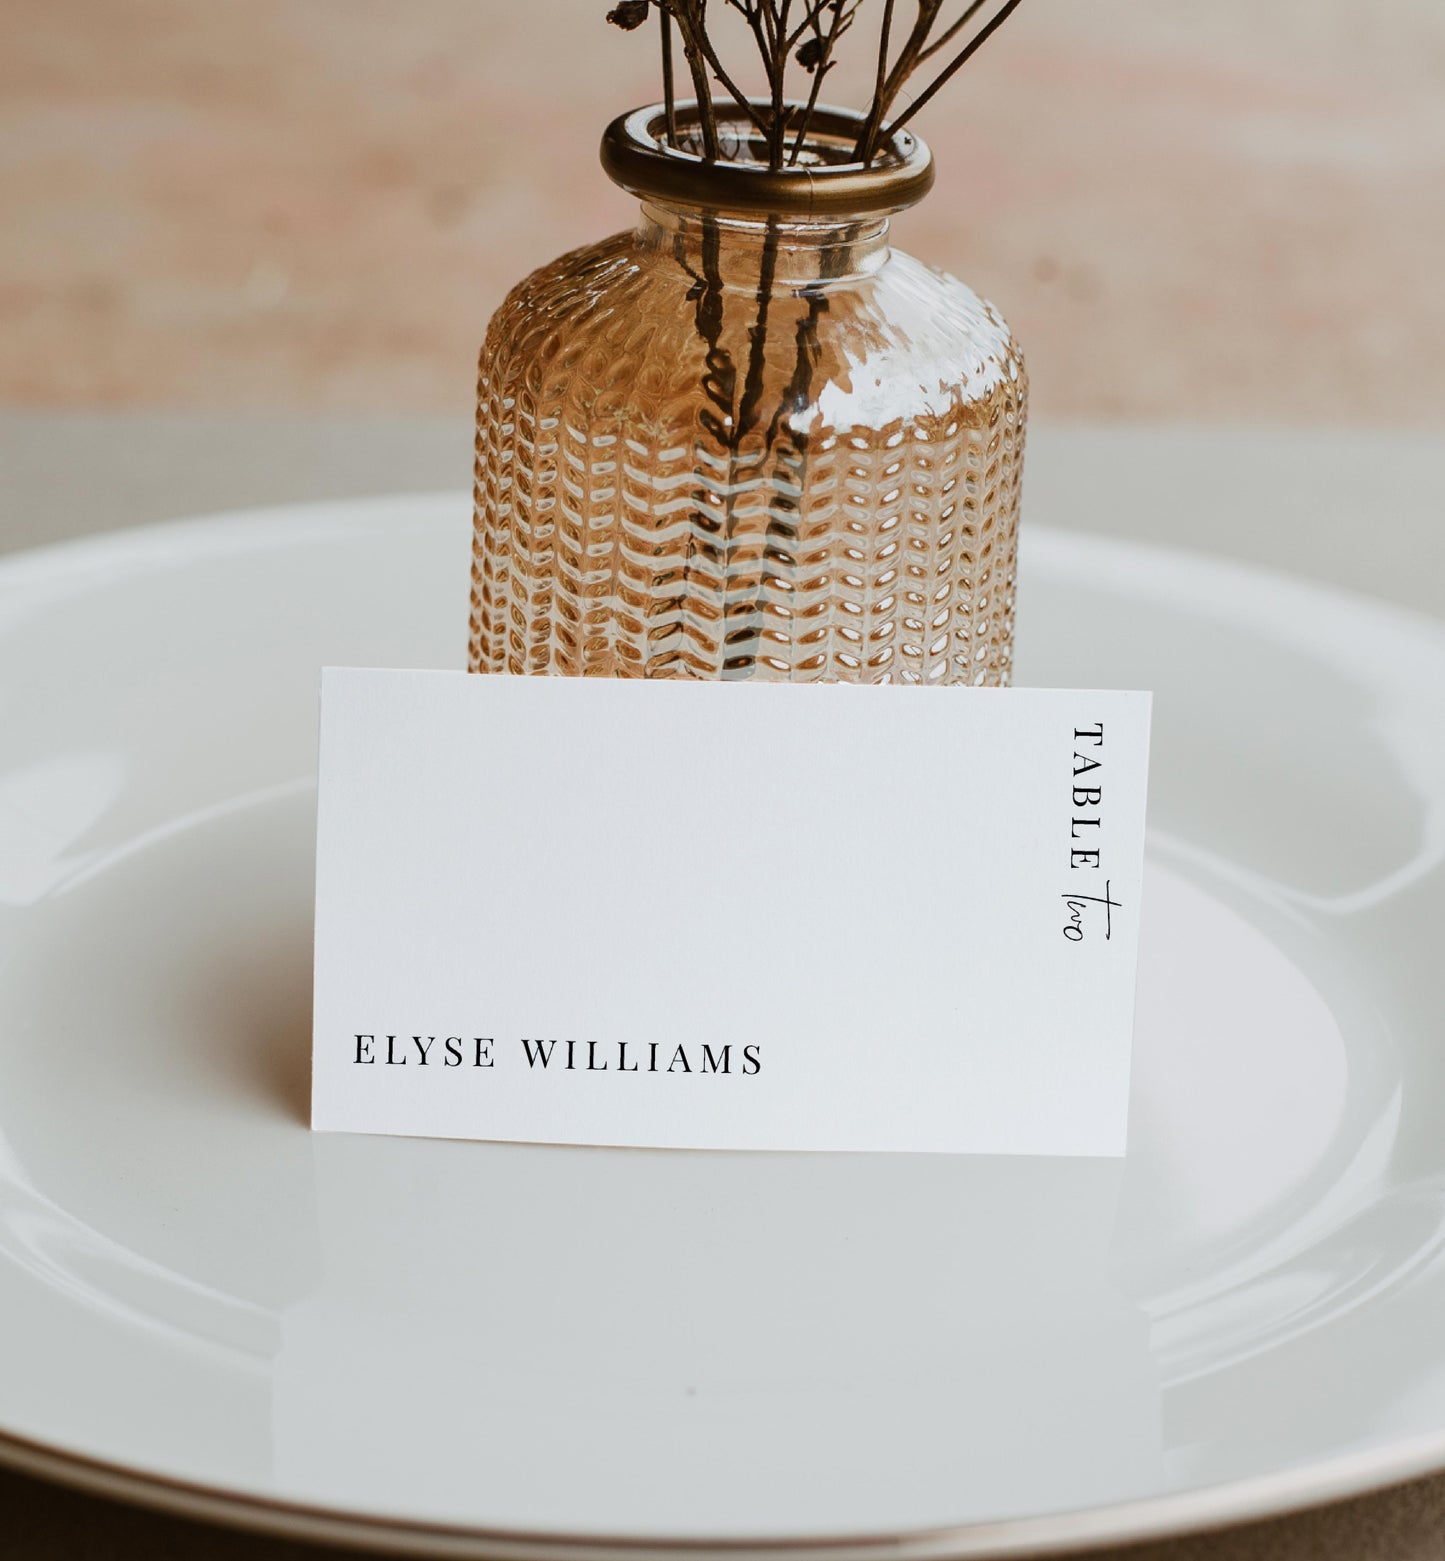 Estelle White | Printable Place Cards Template